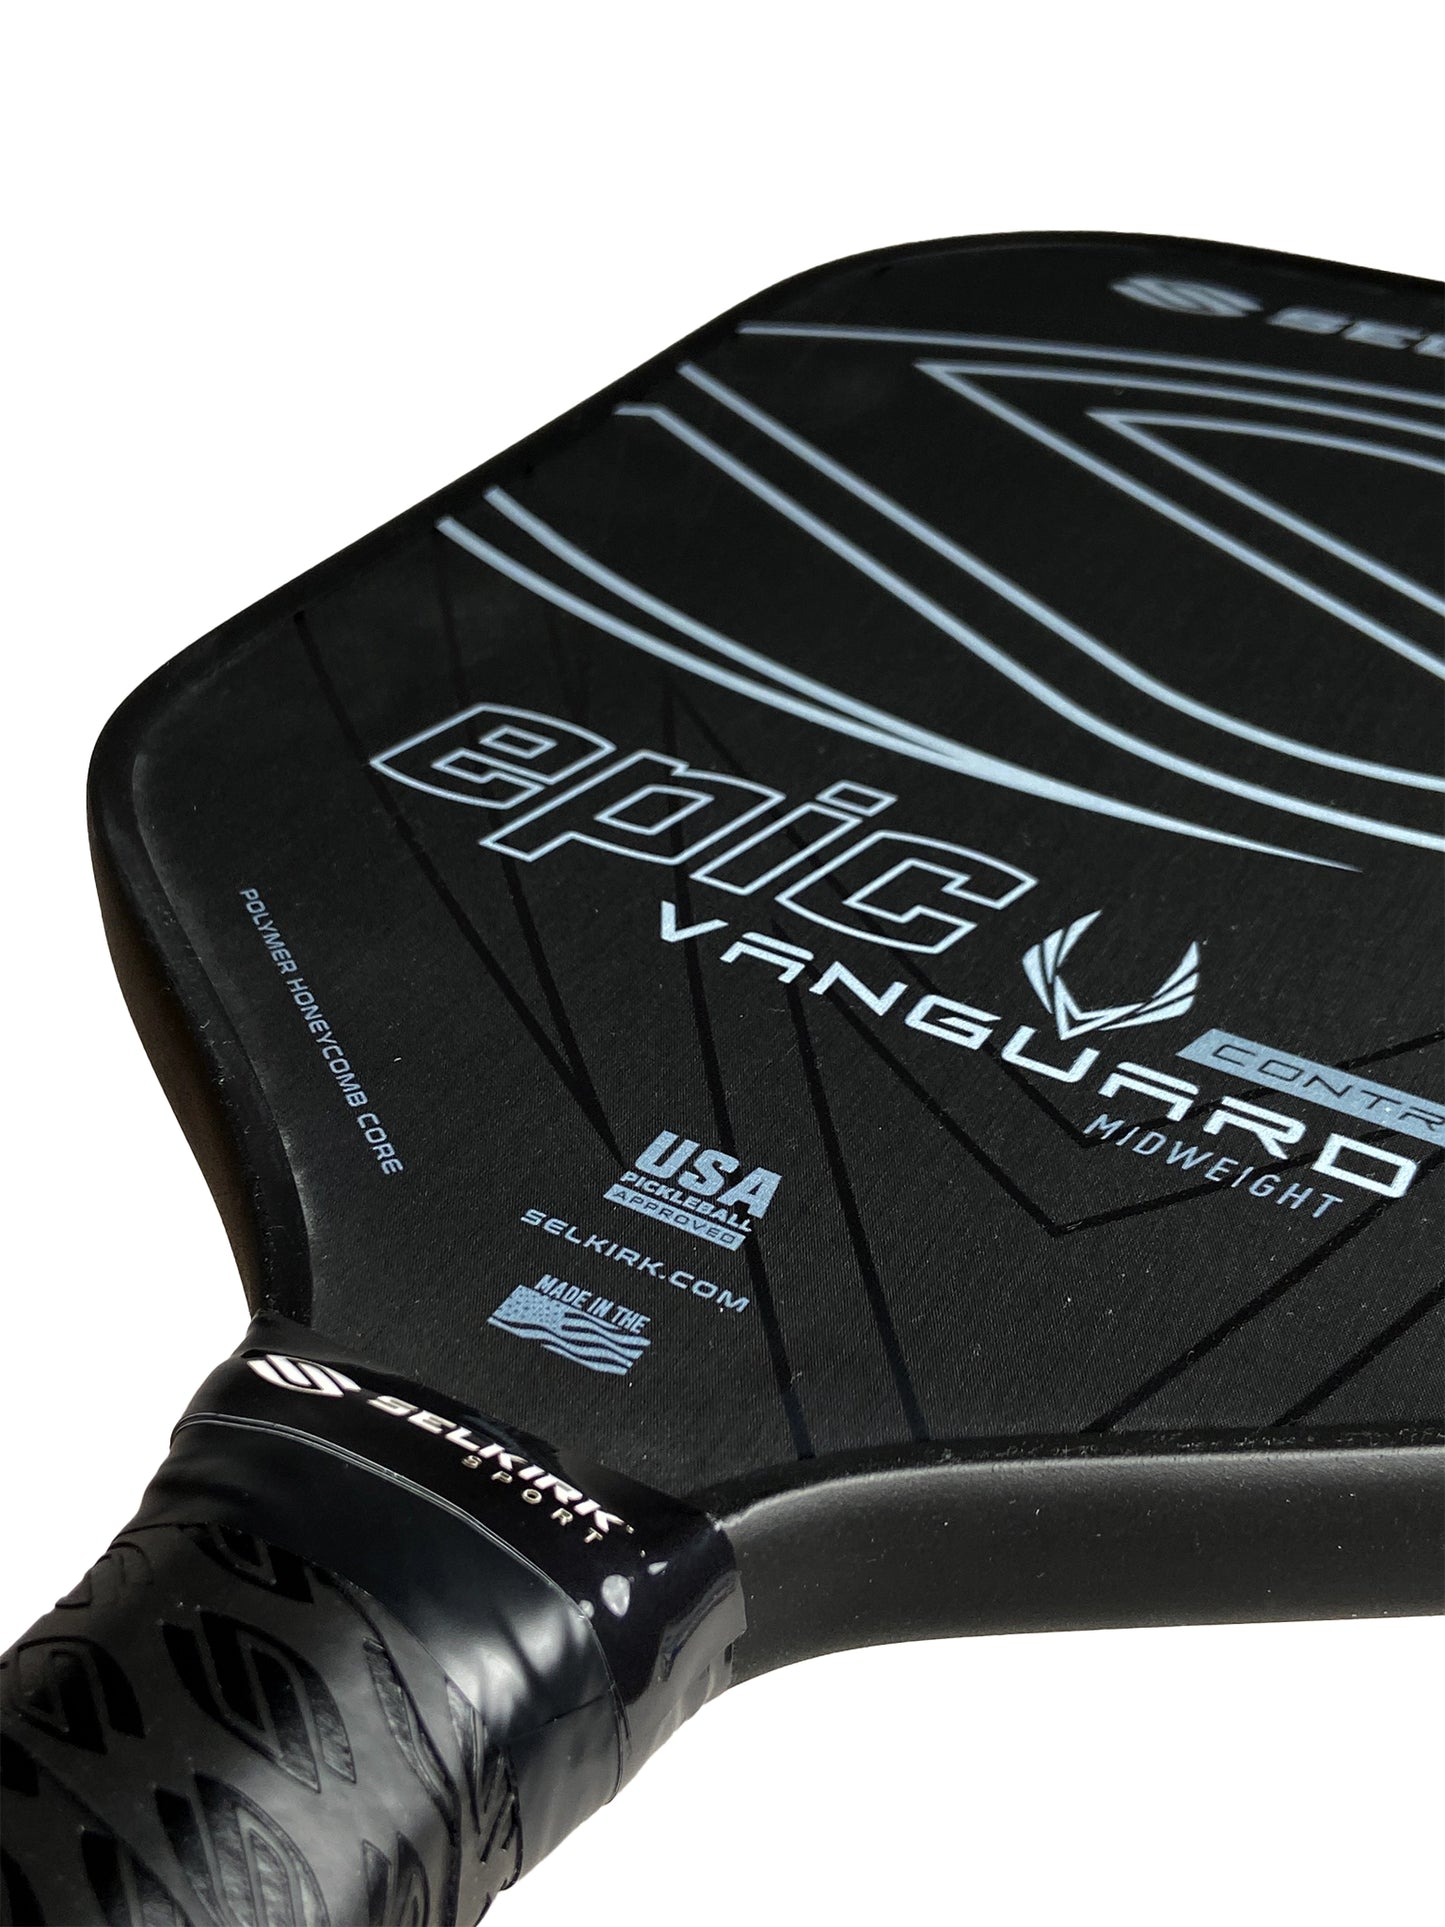 Selkirk Vanguard Control Epic Midweight - Raw Carbon